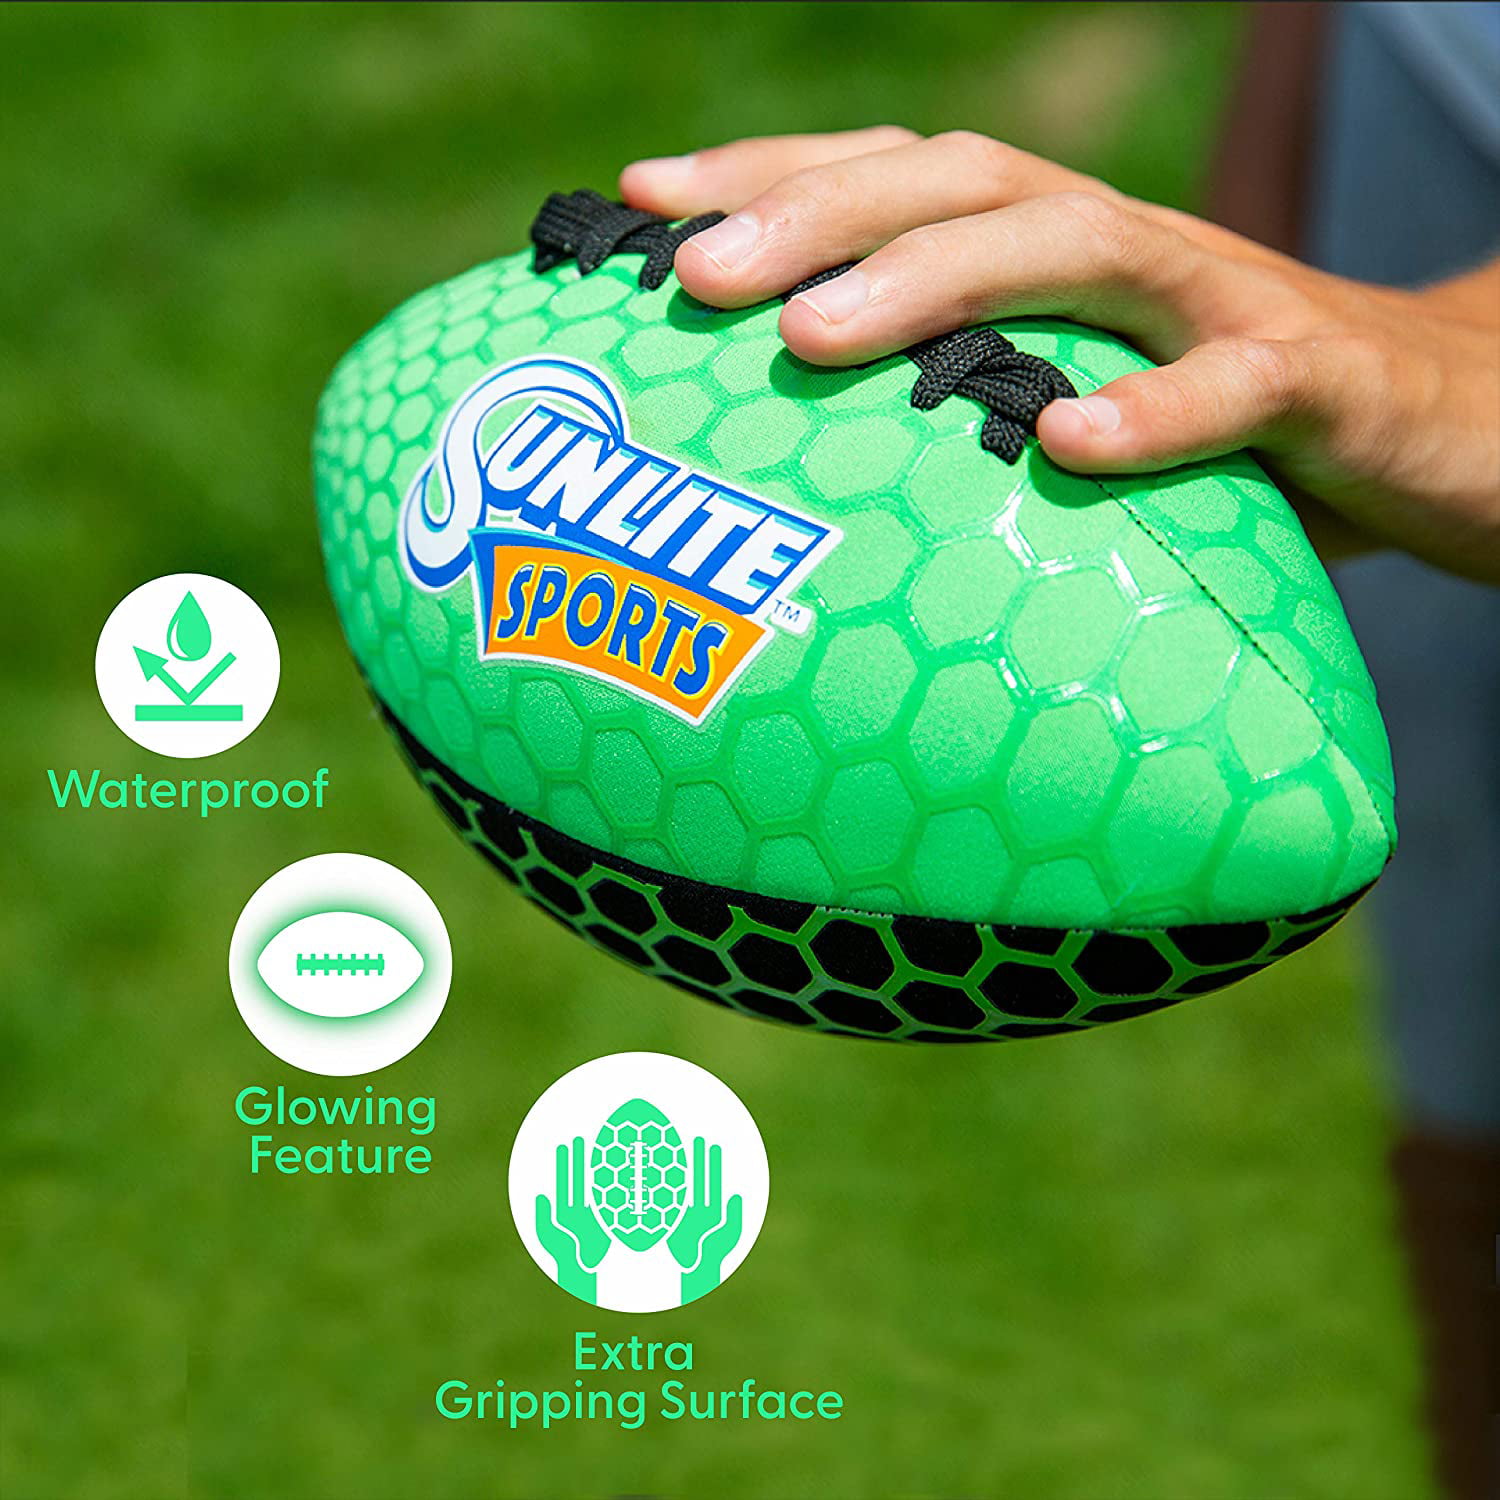 Outdoor Sports and Pool Toy Details about   SUNLITE Sports Football Waterproof Beach Game 